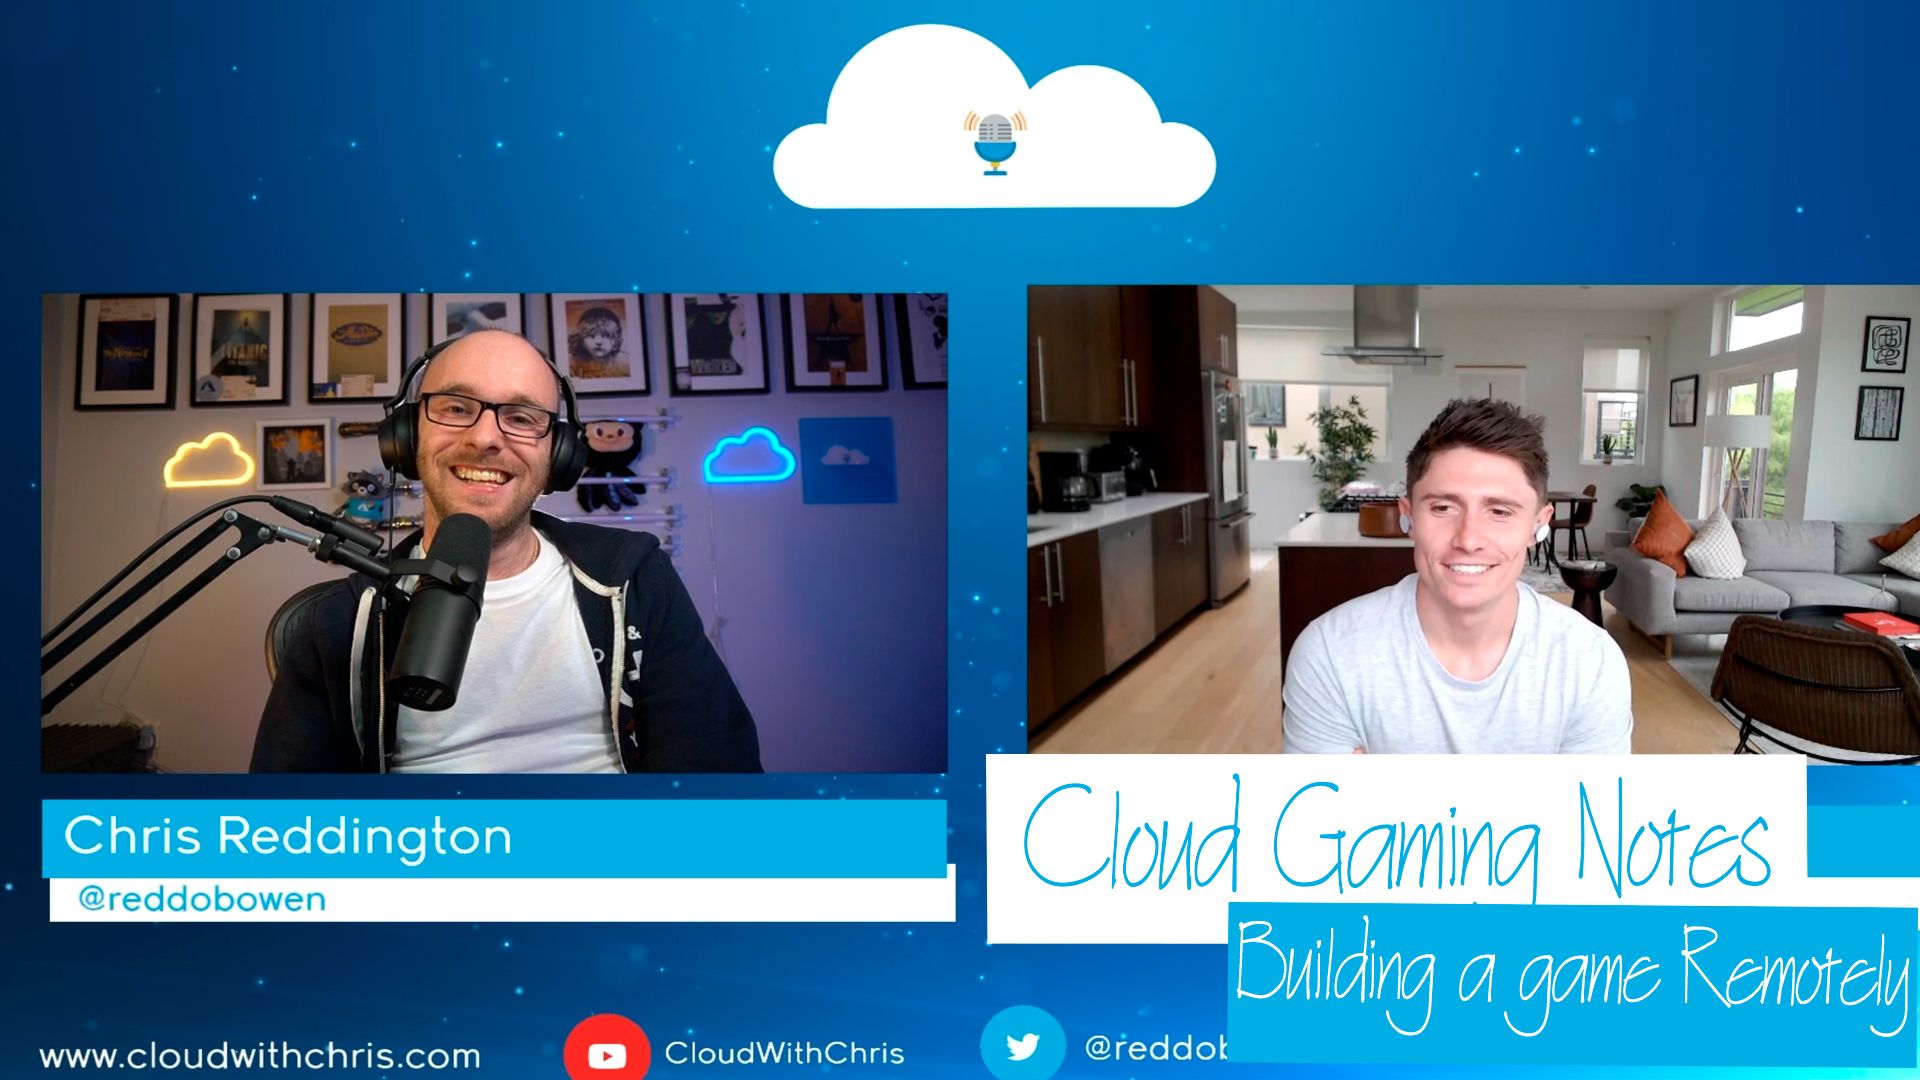 CGN5 - Cloud Gaming Notes Episode 5 - Building a game remotely